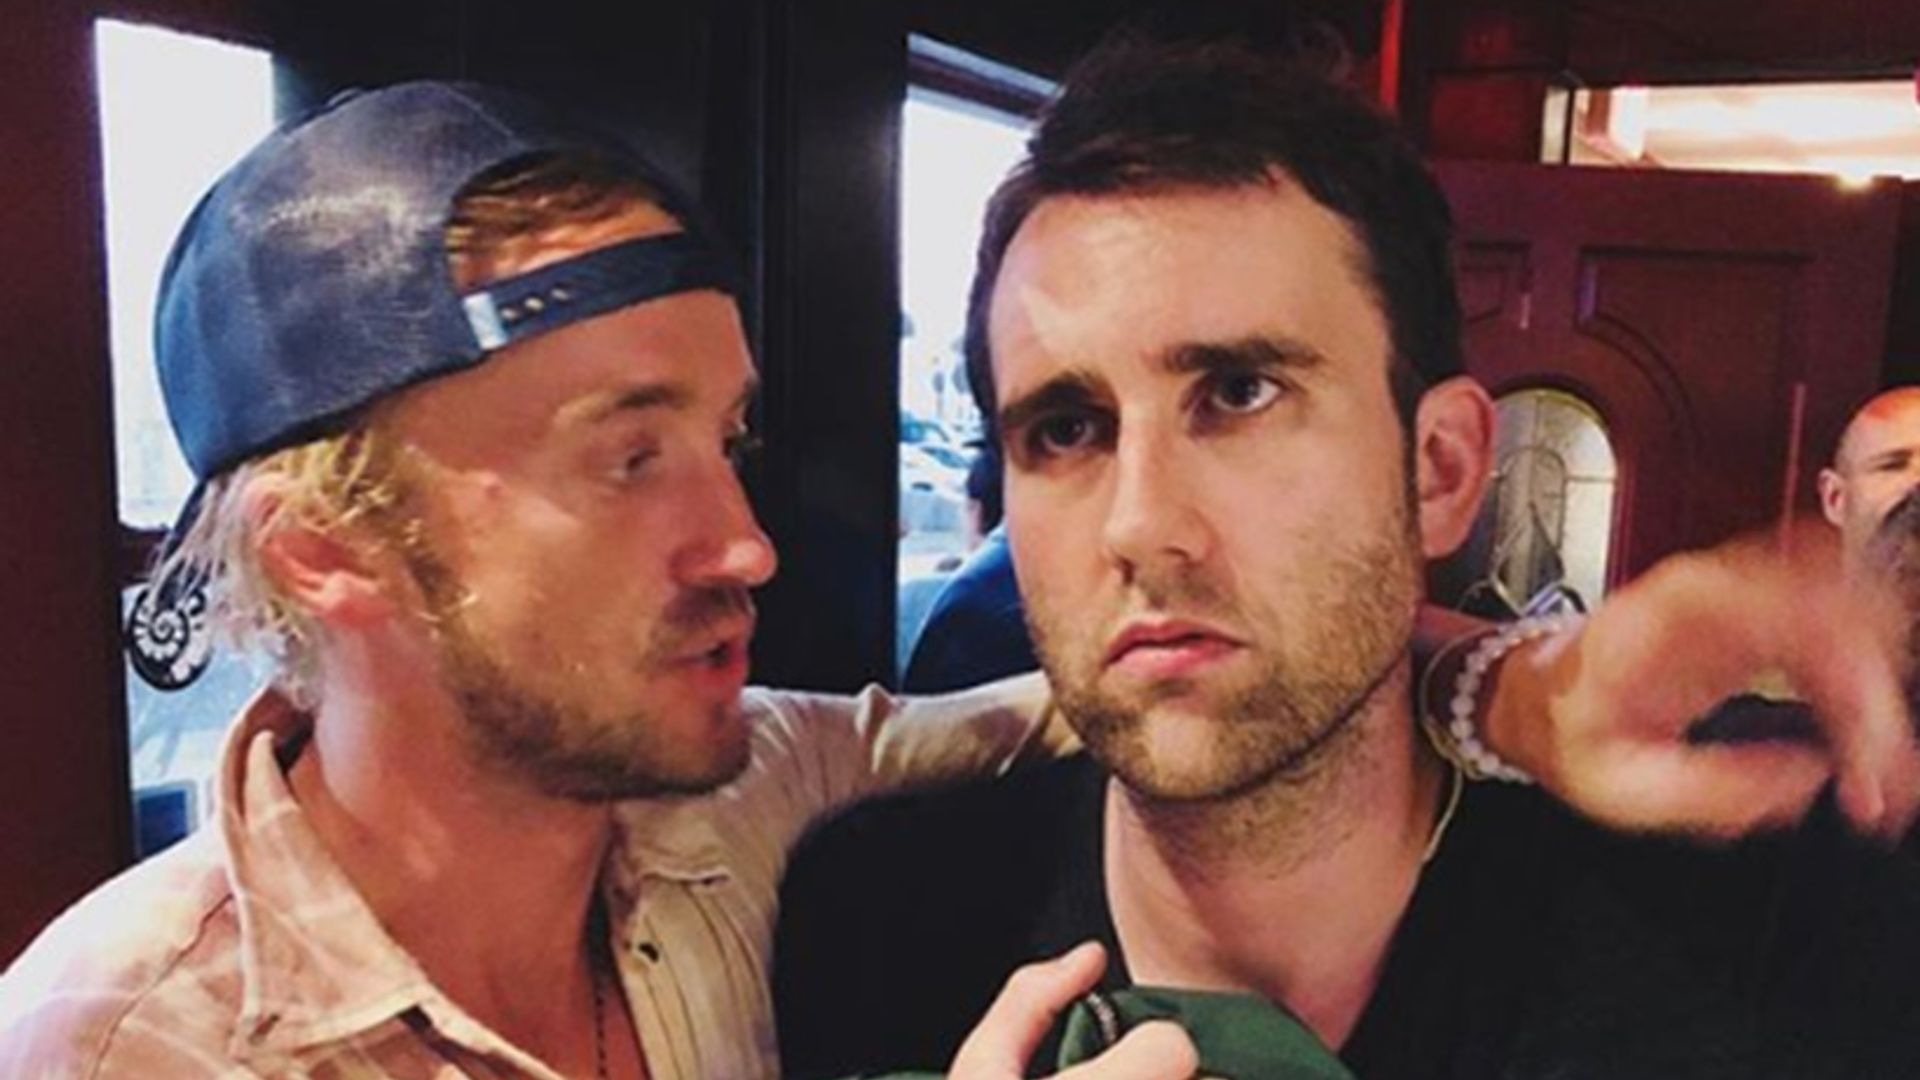 Harry Potter's Tom Felton tries to turn Matthew Lewis into a Slytherin and fans love it